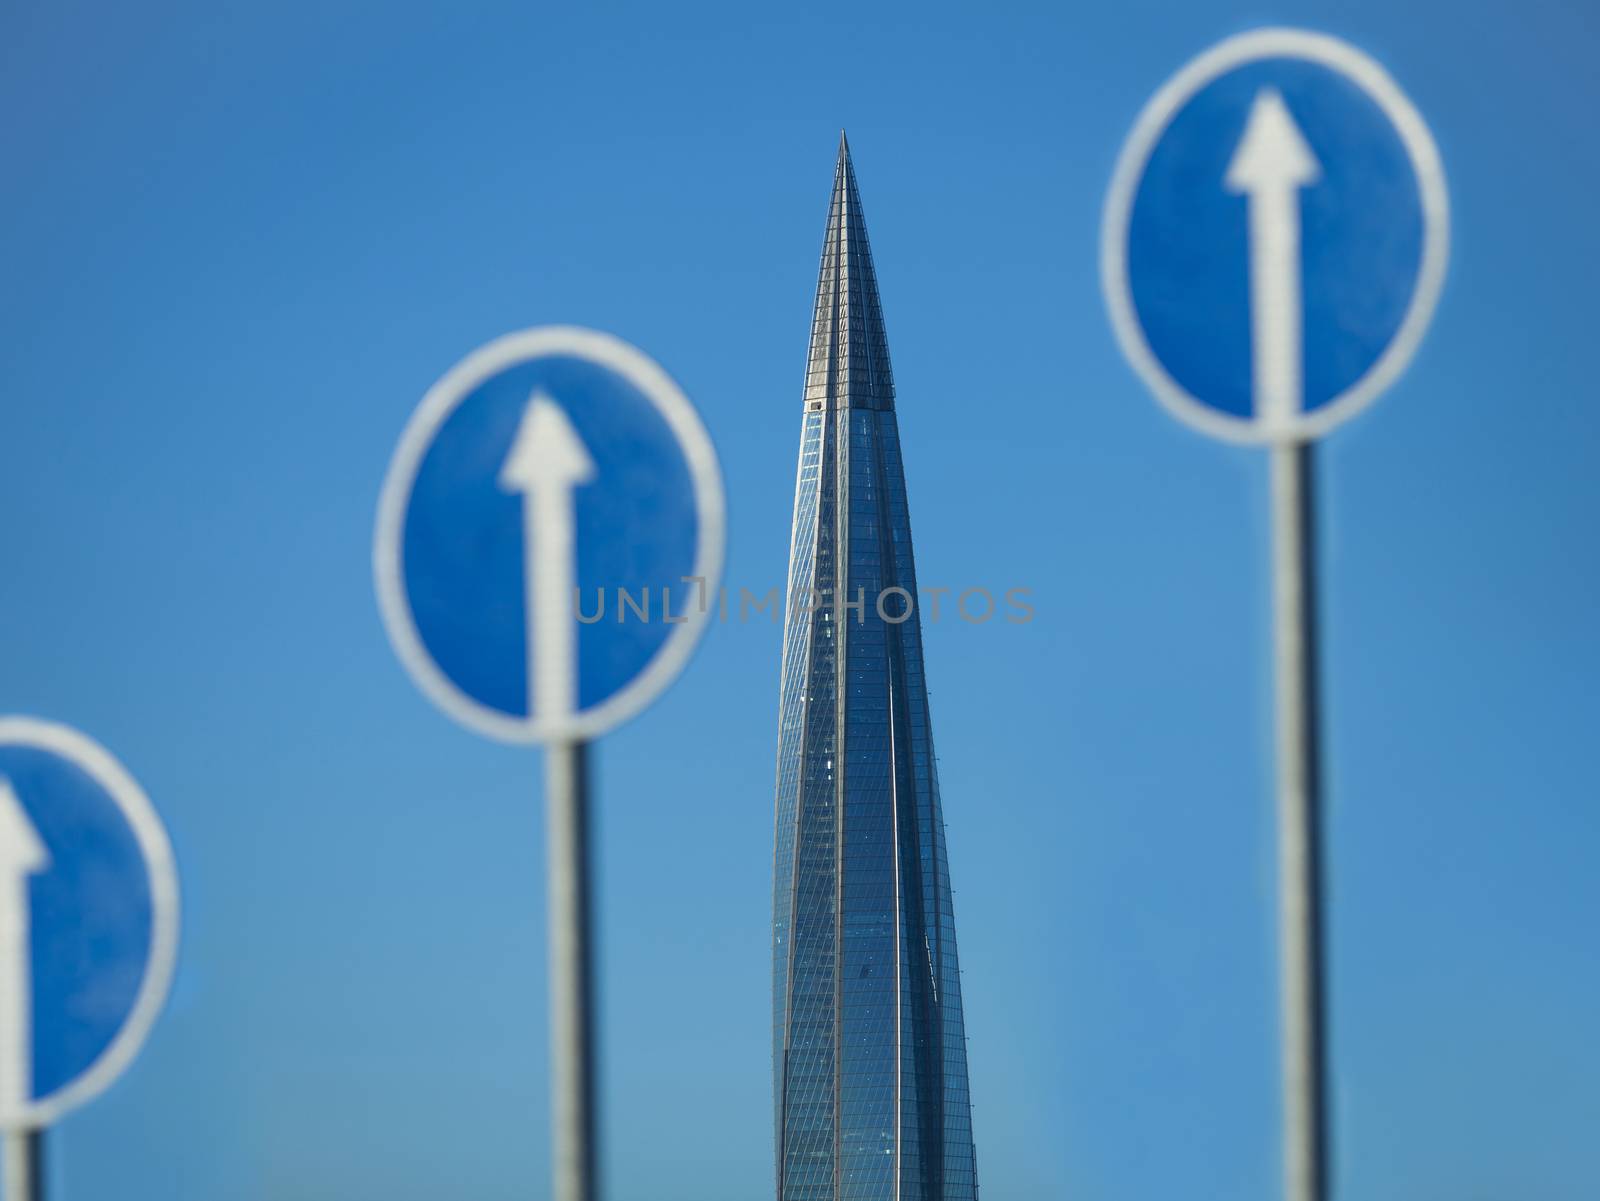 skyscraper spire and a Road sign white arrow up, concept of movement and business success